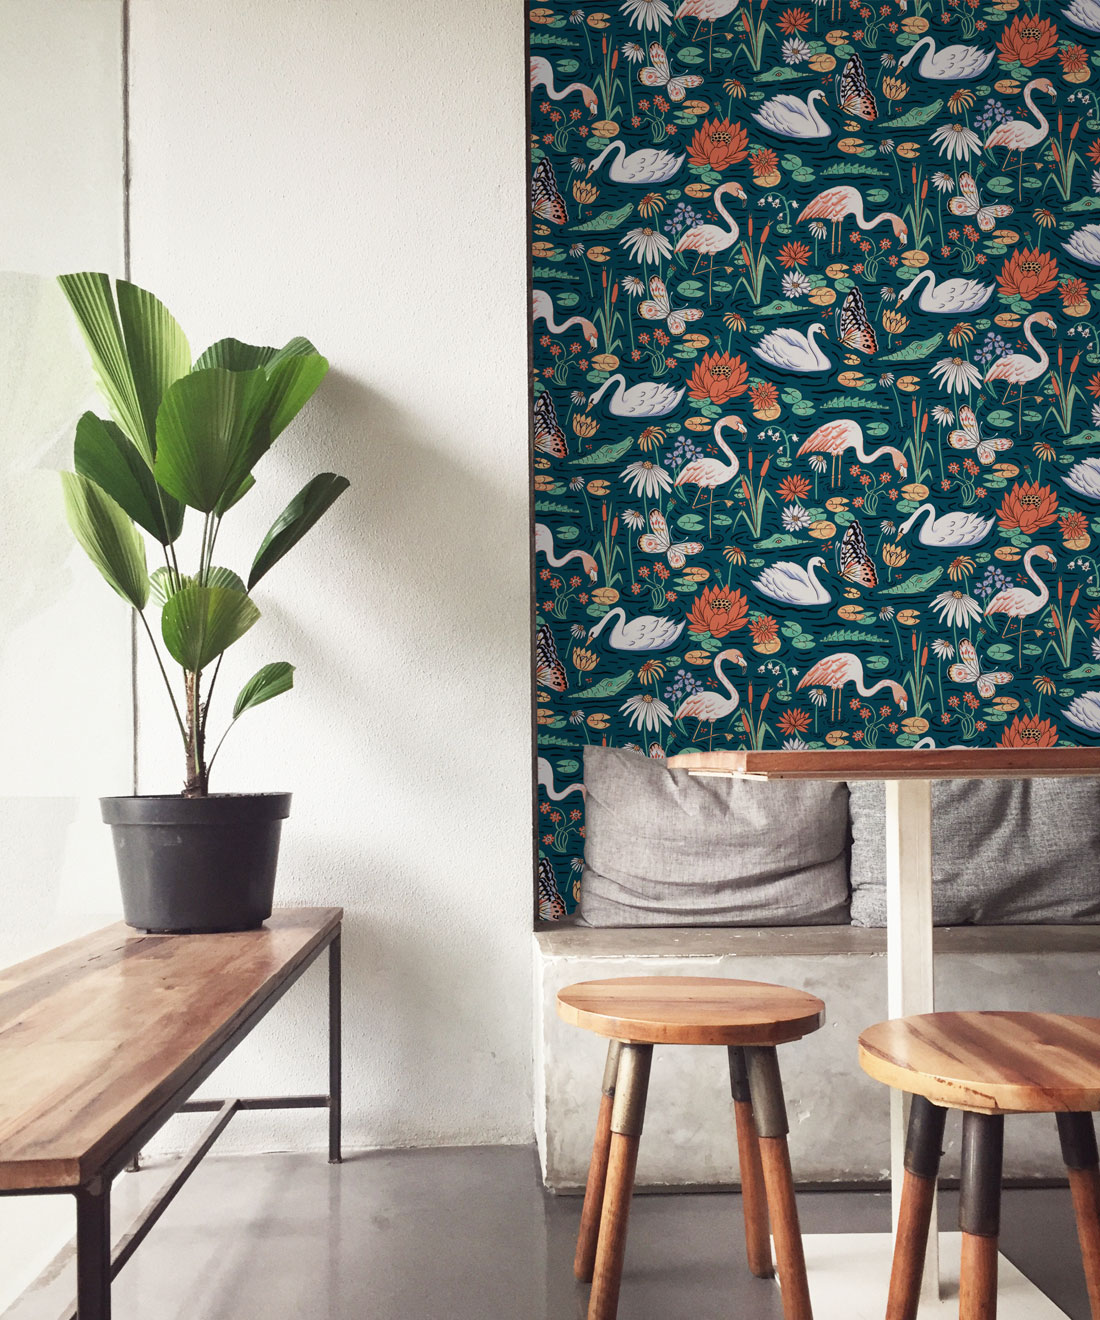 Pond Pattern Wallpaper featuring alligators, swans, flamingos and lily pads insitu